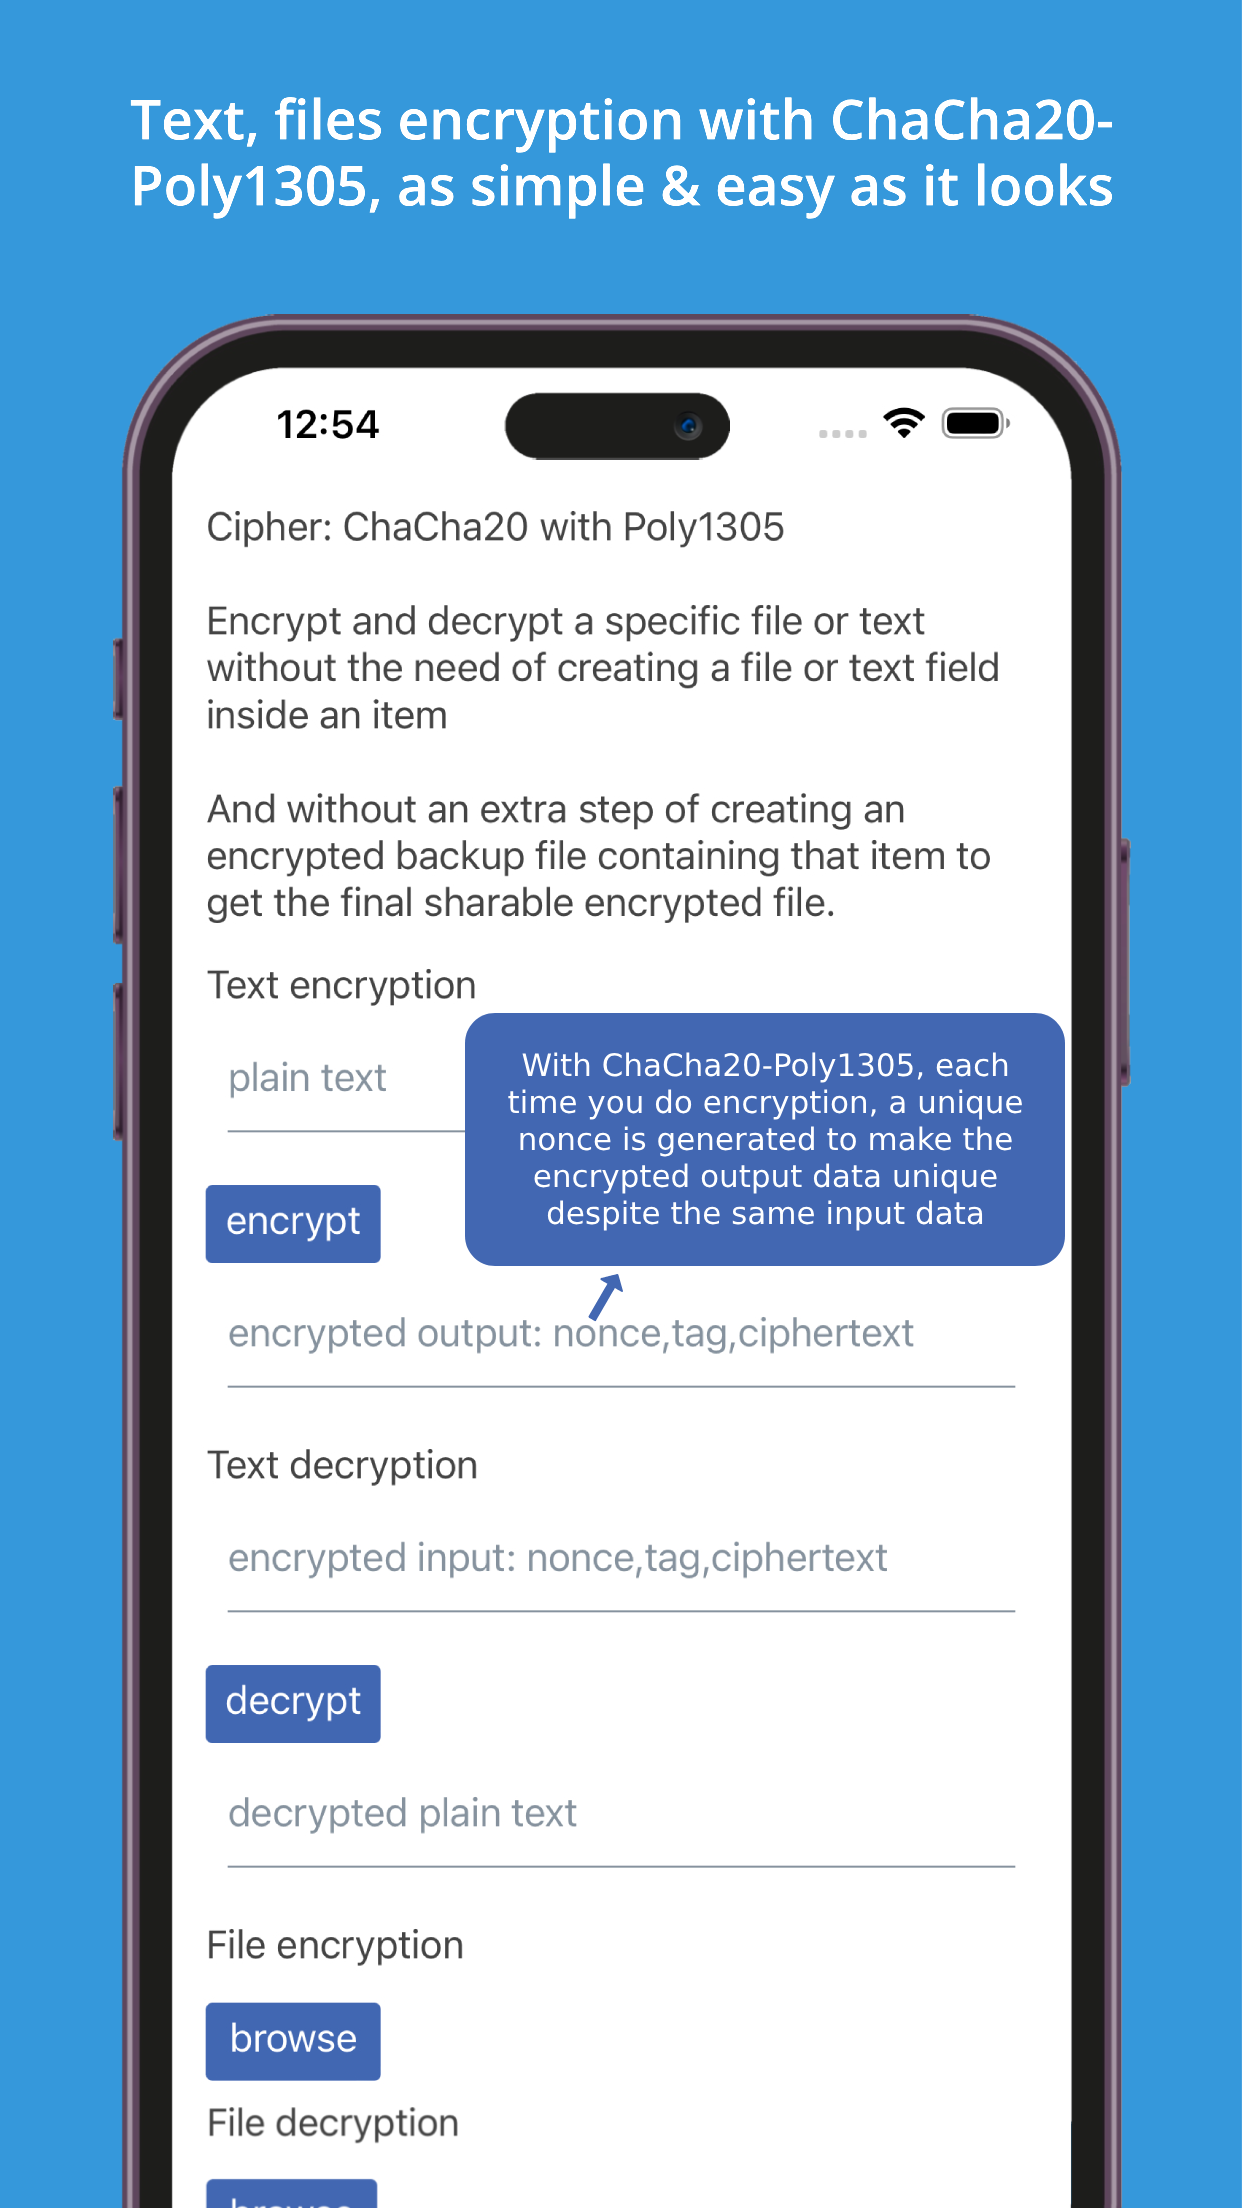 Text, files encryption with ChaCha20-Poly1305, as simple & easy as it looks